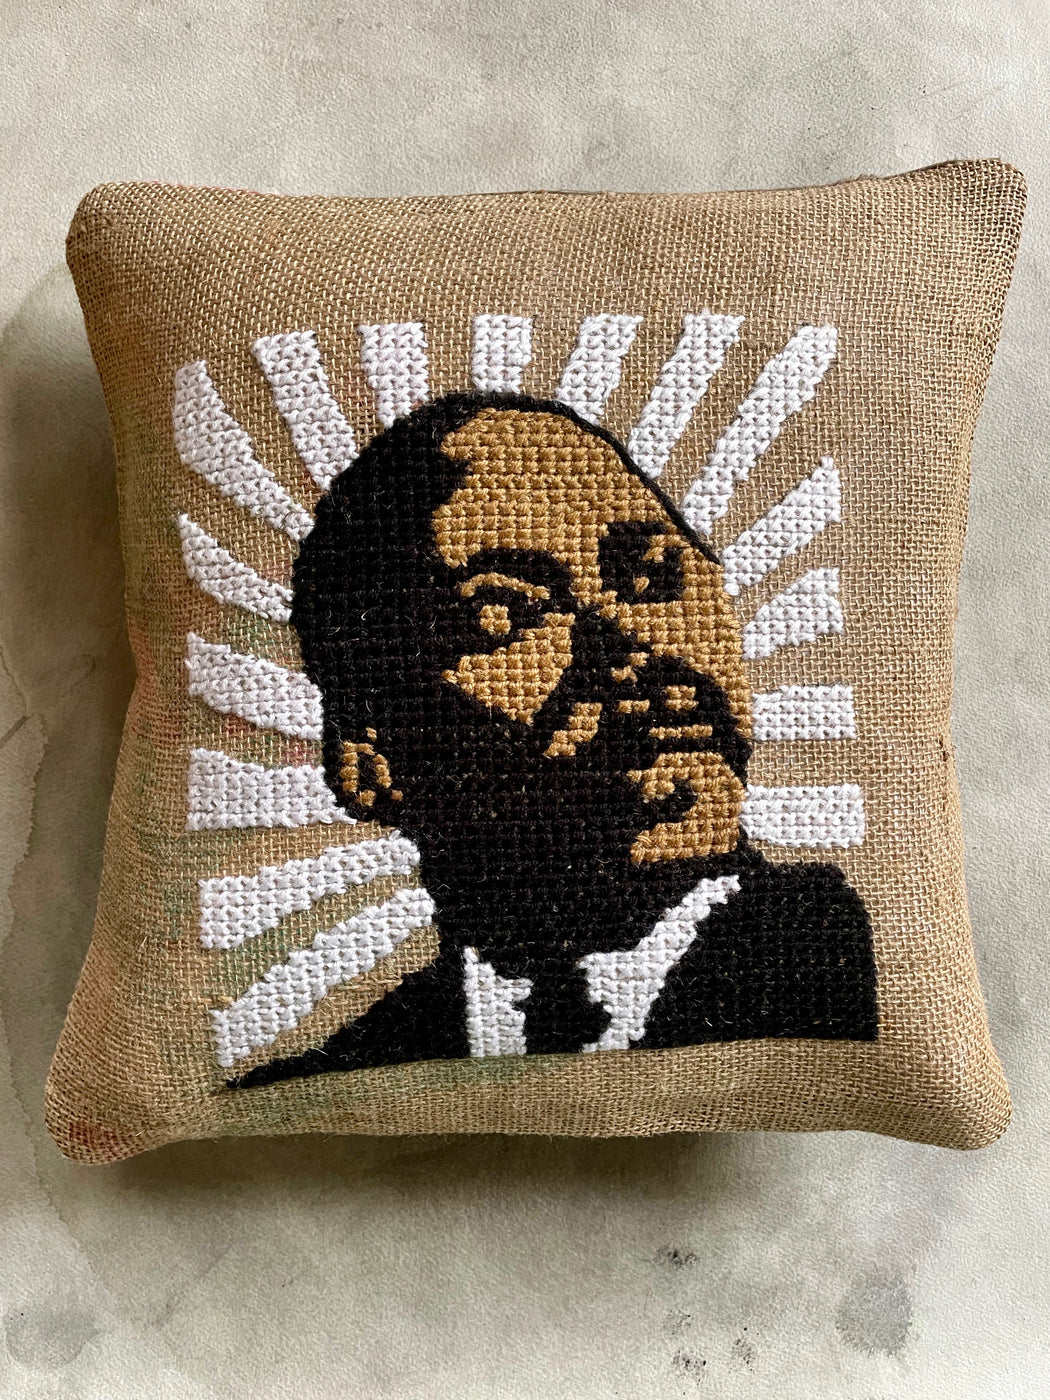 "Martin Luther King Jr." Hand-Embroidered Pillow